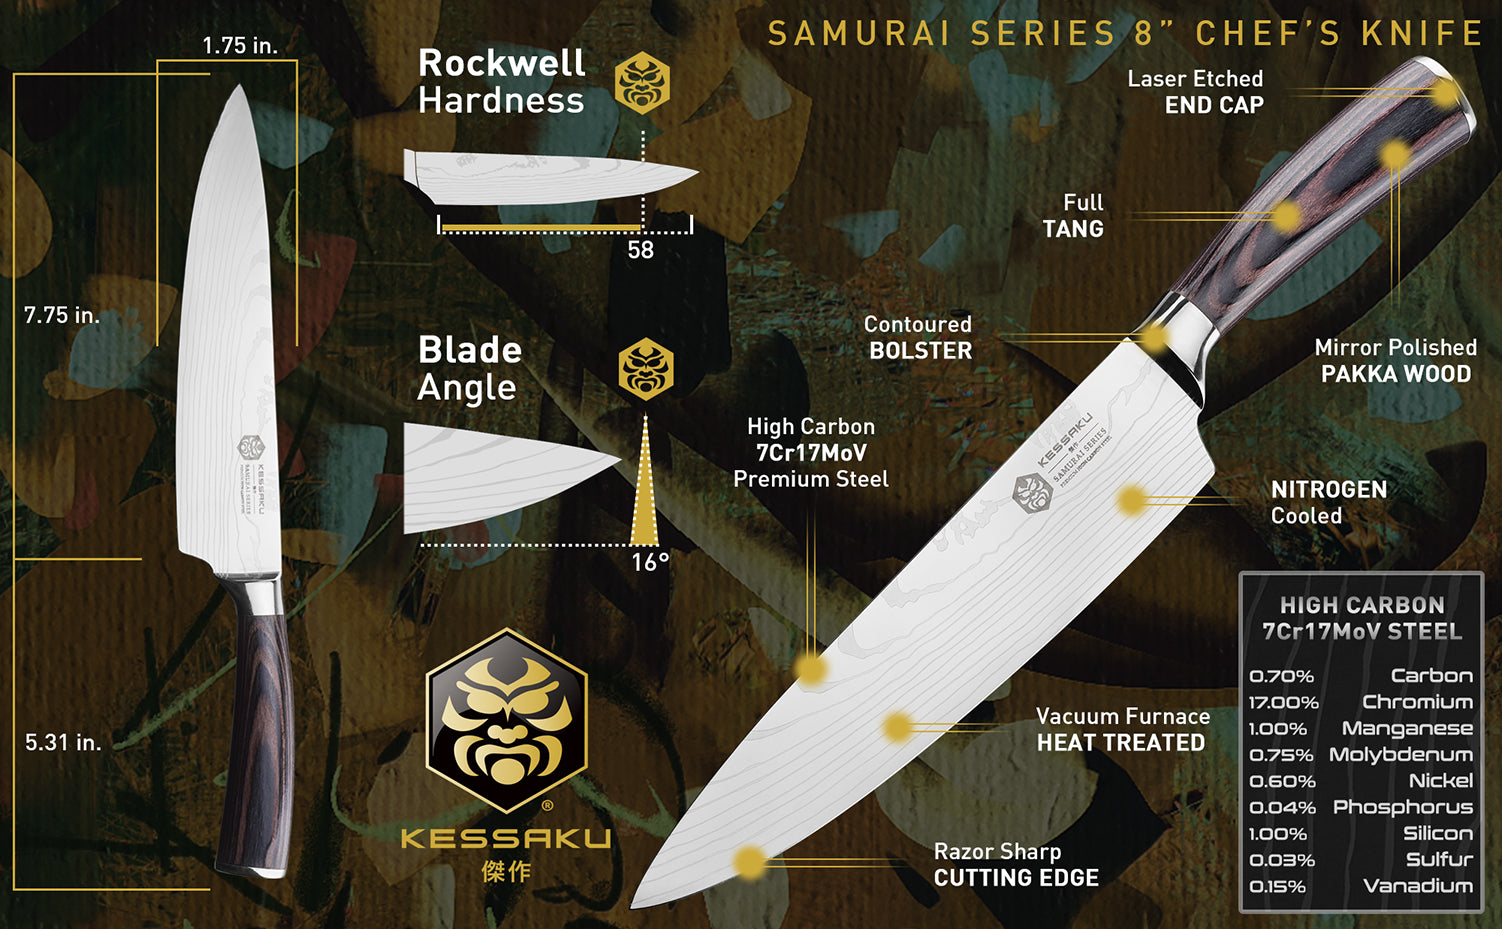 The Kessaku Samurai Series 8-Inch Chef's Knife's features, dimensions, and steel composition